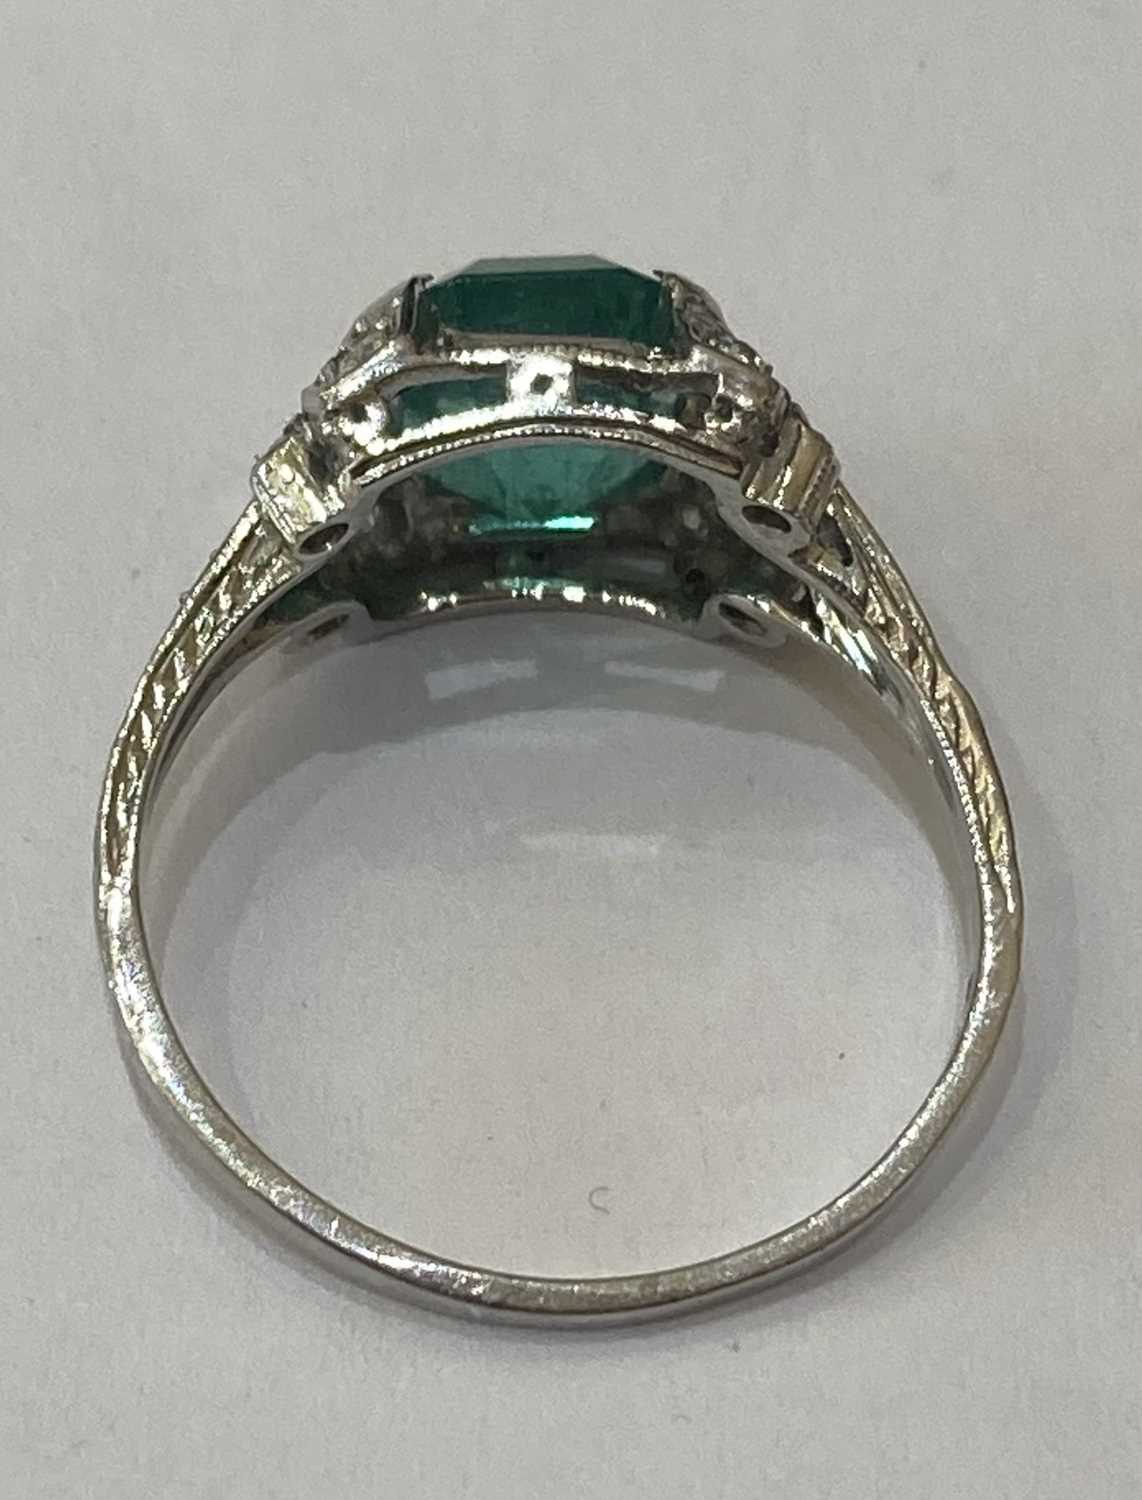 An Emerald and Diamond Ring - Image 2 of 6